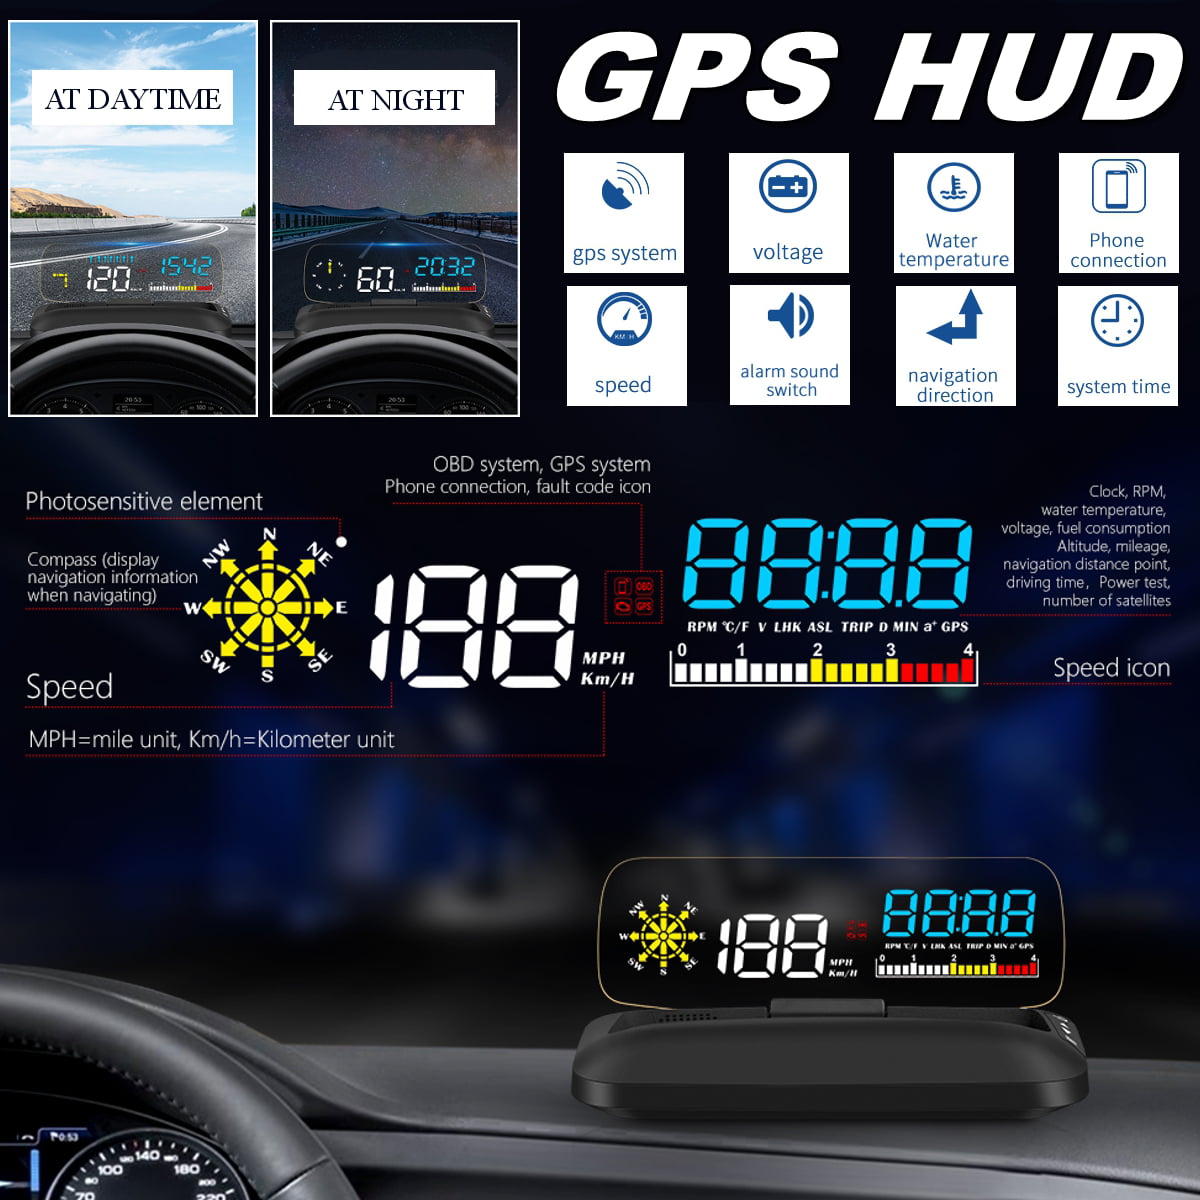 5.5inch Universal Car Black HUD Display Hud Head Up Display High Definition Projector Used to Displays Vehicle Speed Water Temperature Voltage Instantaneous Fuel Consumption Odometer